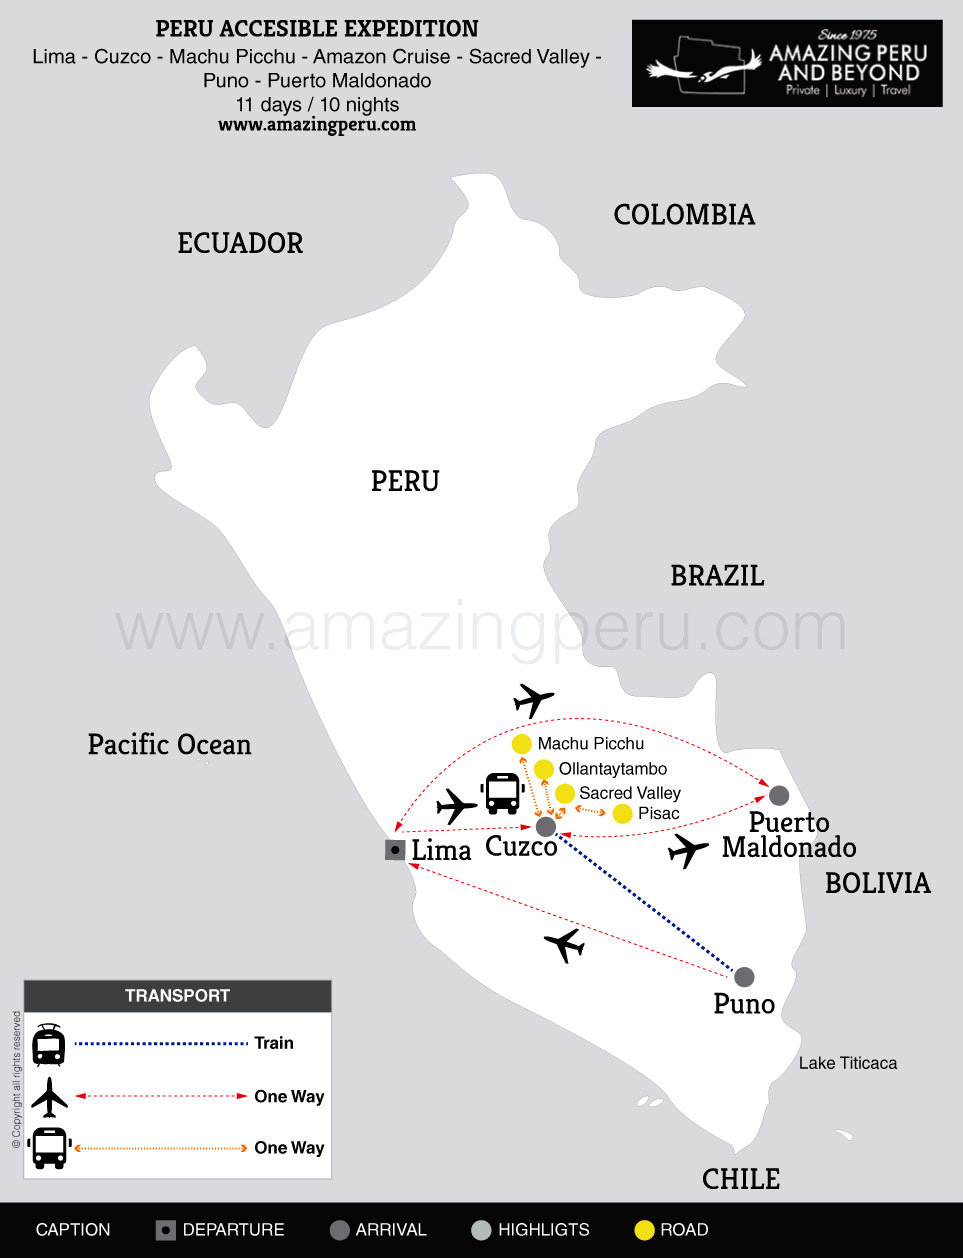 2022 Peru Accesible Expedition - 11 days / 10 nights.